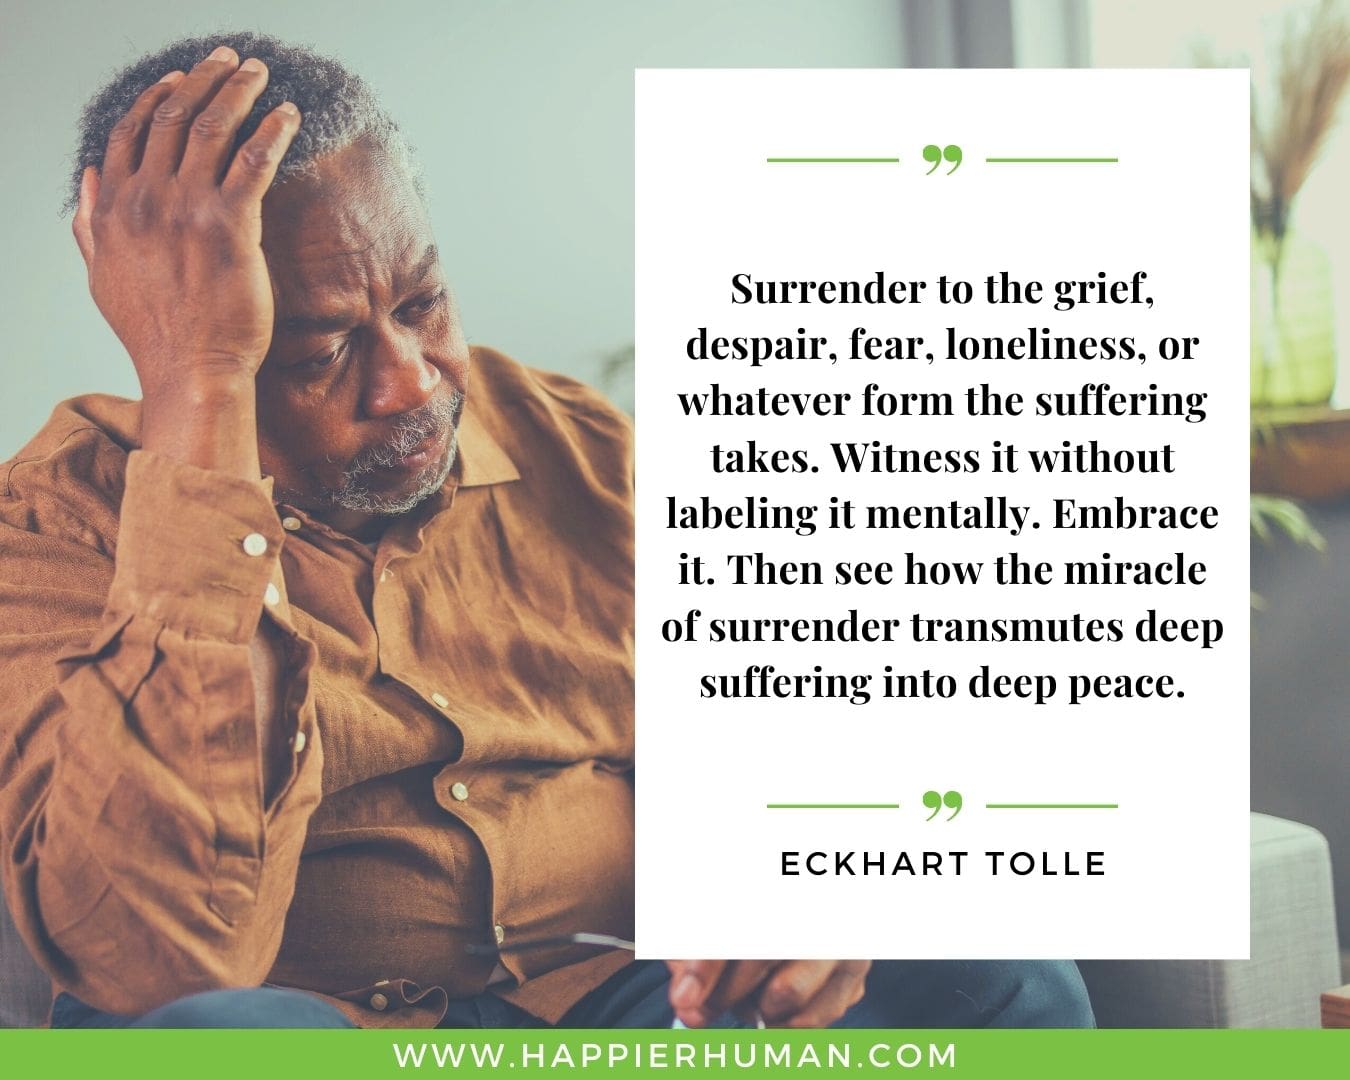 Loneliness Quotes - “Surrender to the grief, despair, fear, loneliness, or whatever form the suffering takes. Witness it without labeling it mentally. Embrace it. Then see how the miracle of surrender transmutes deep suffering into deep peace.” – Eckhart Tolle